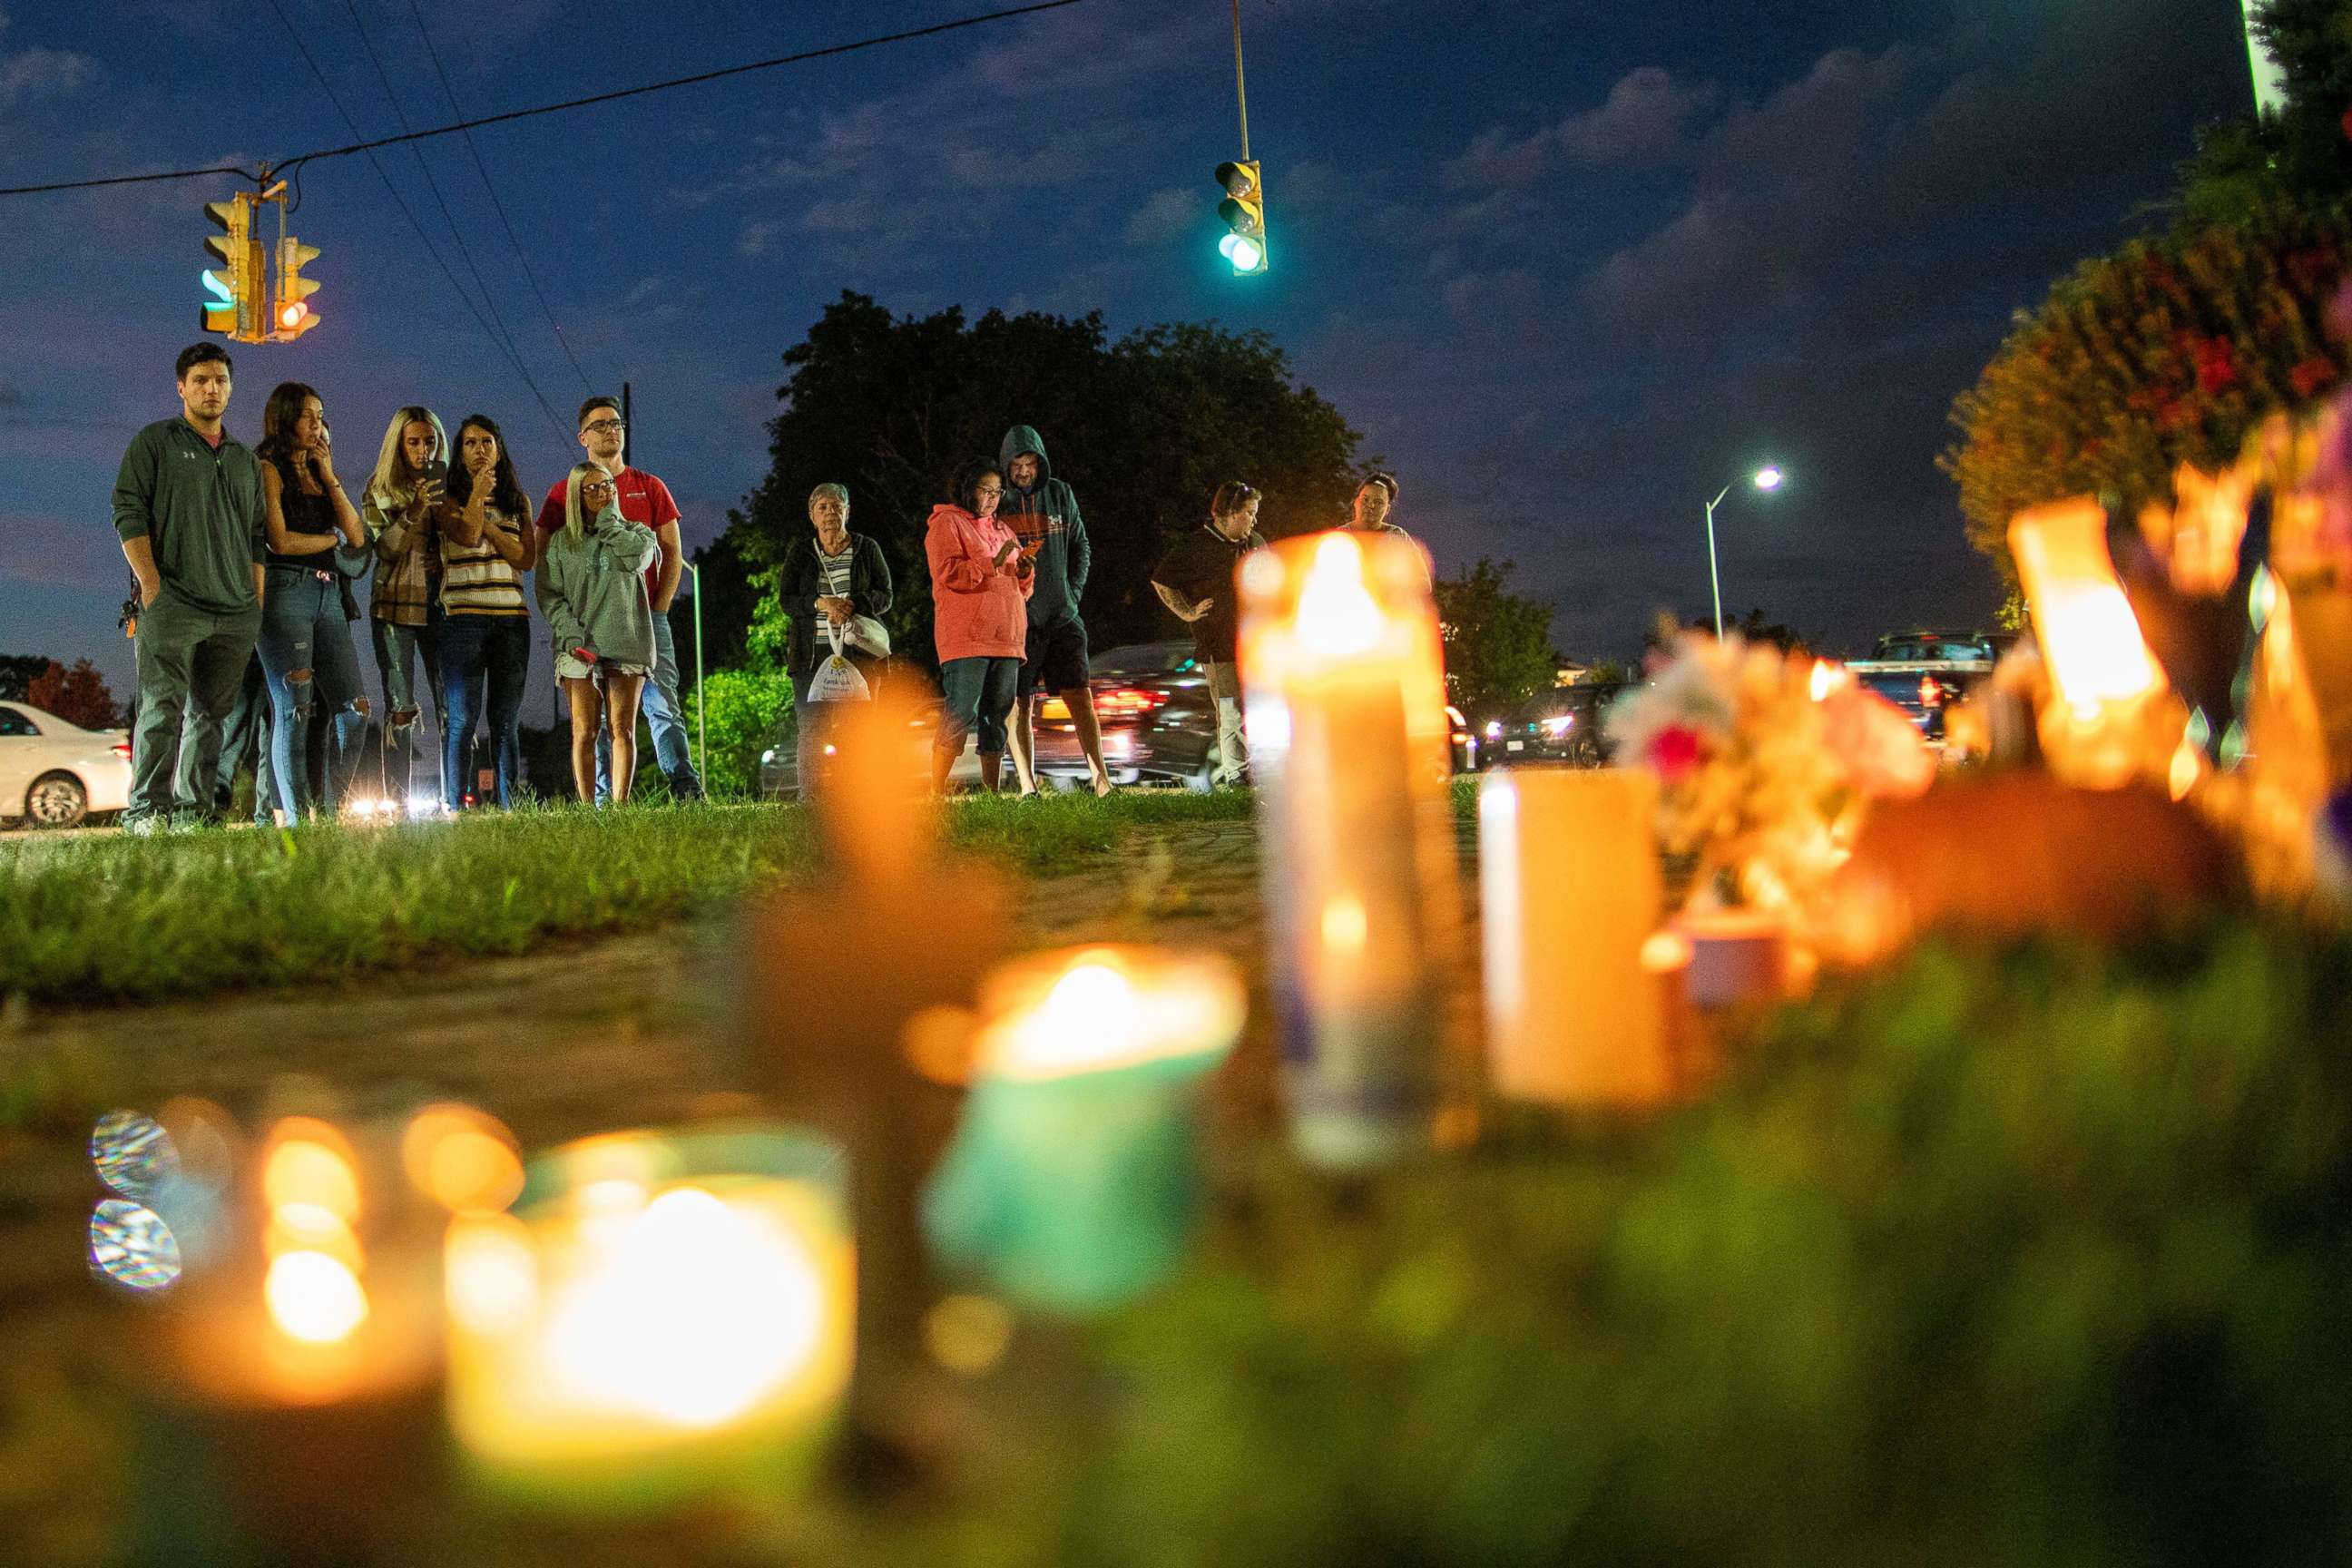 PHOTO: People pay respect in a makeshift memorial during a candlelight vigil for travel blogger Gabby Petito in Blue Point, New York, Sept. 24, 2021.